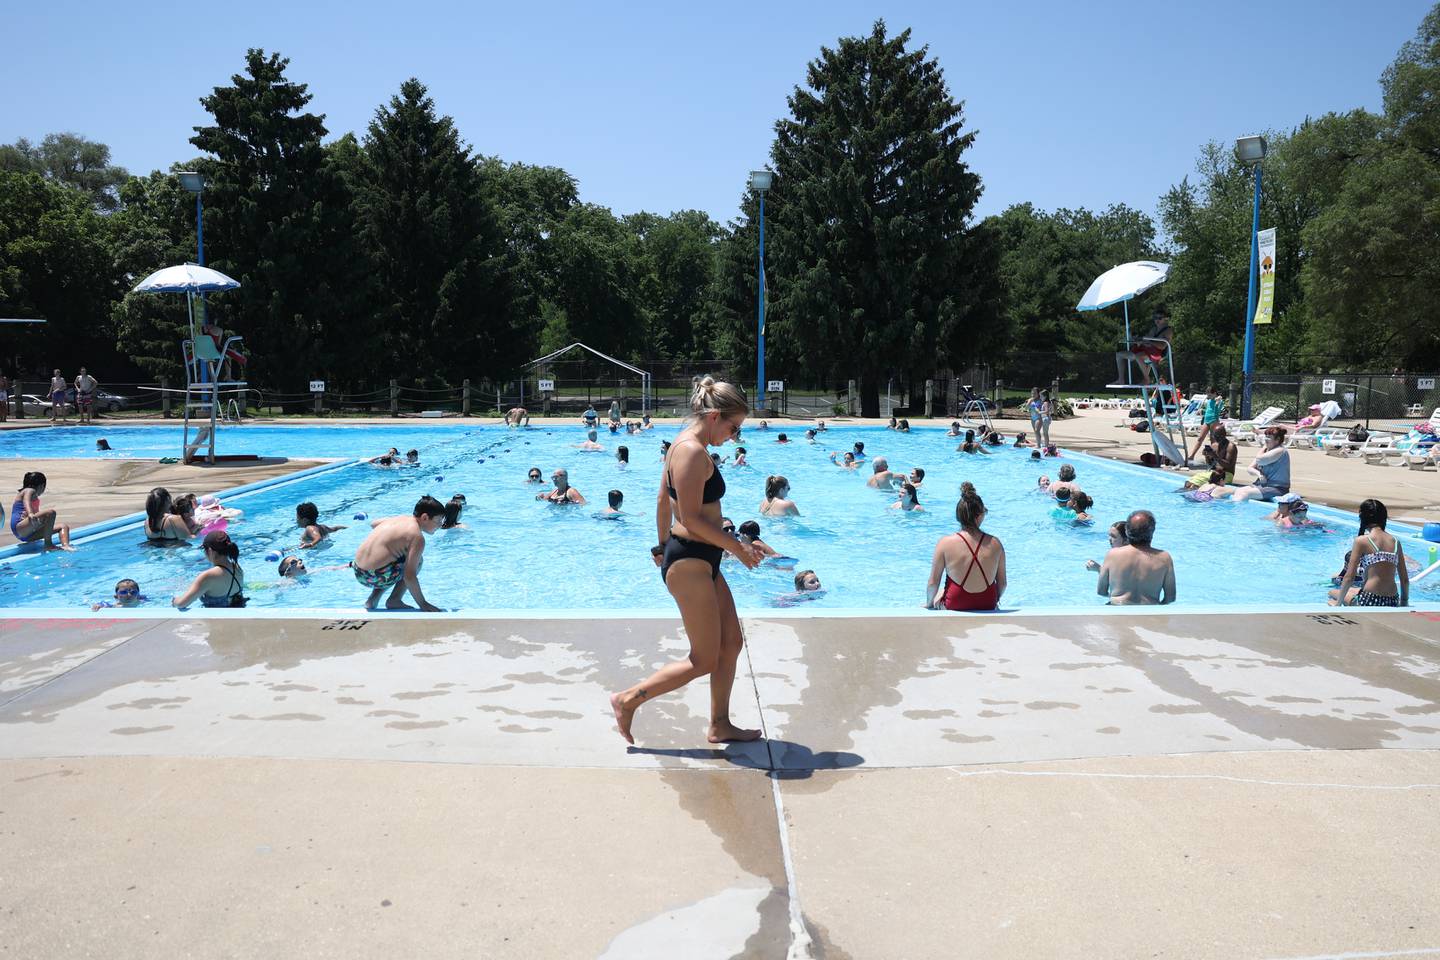 As temperatures reach triple digits residents of Plainfield find relief at the Ottawa Street Pool in Plainfield. Tuesday, June 14, 2022 in Plainfield.